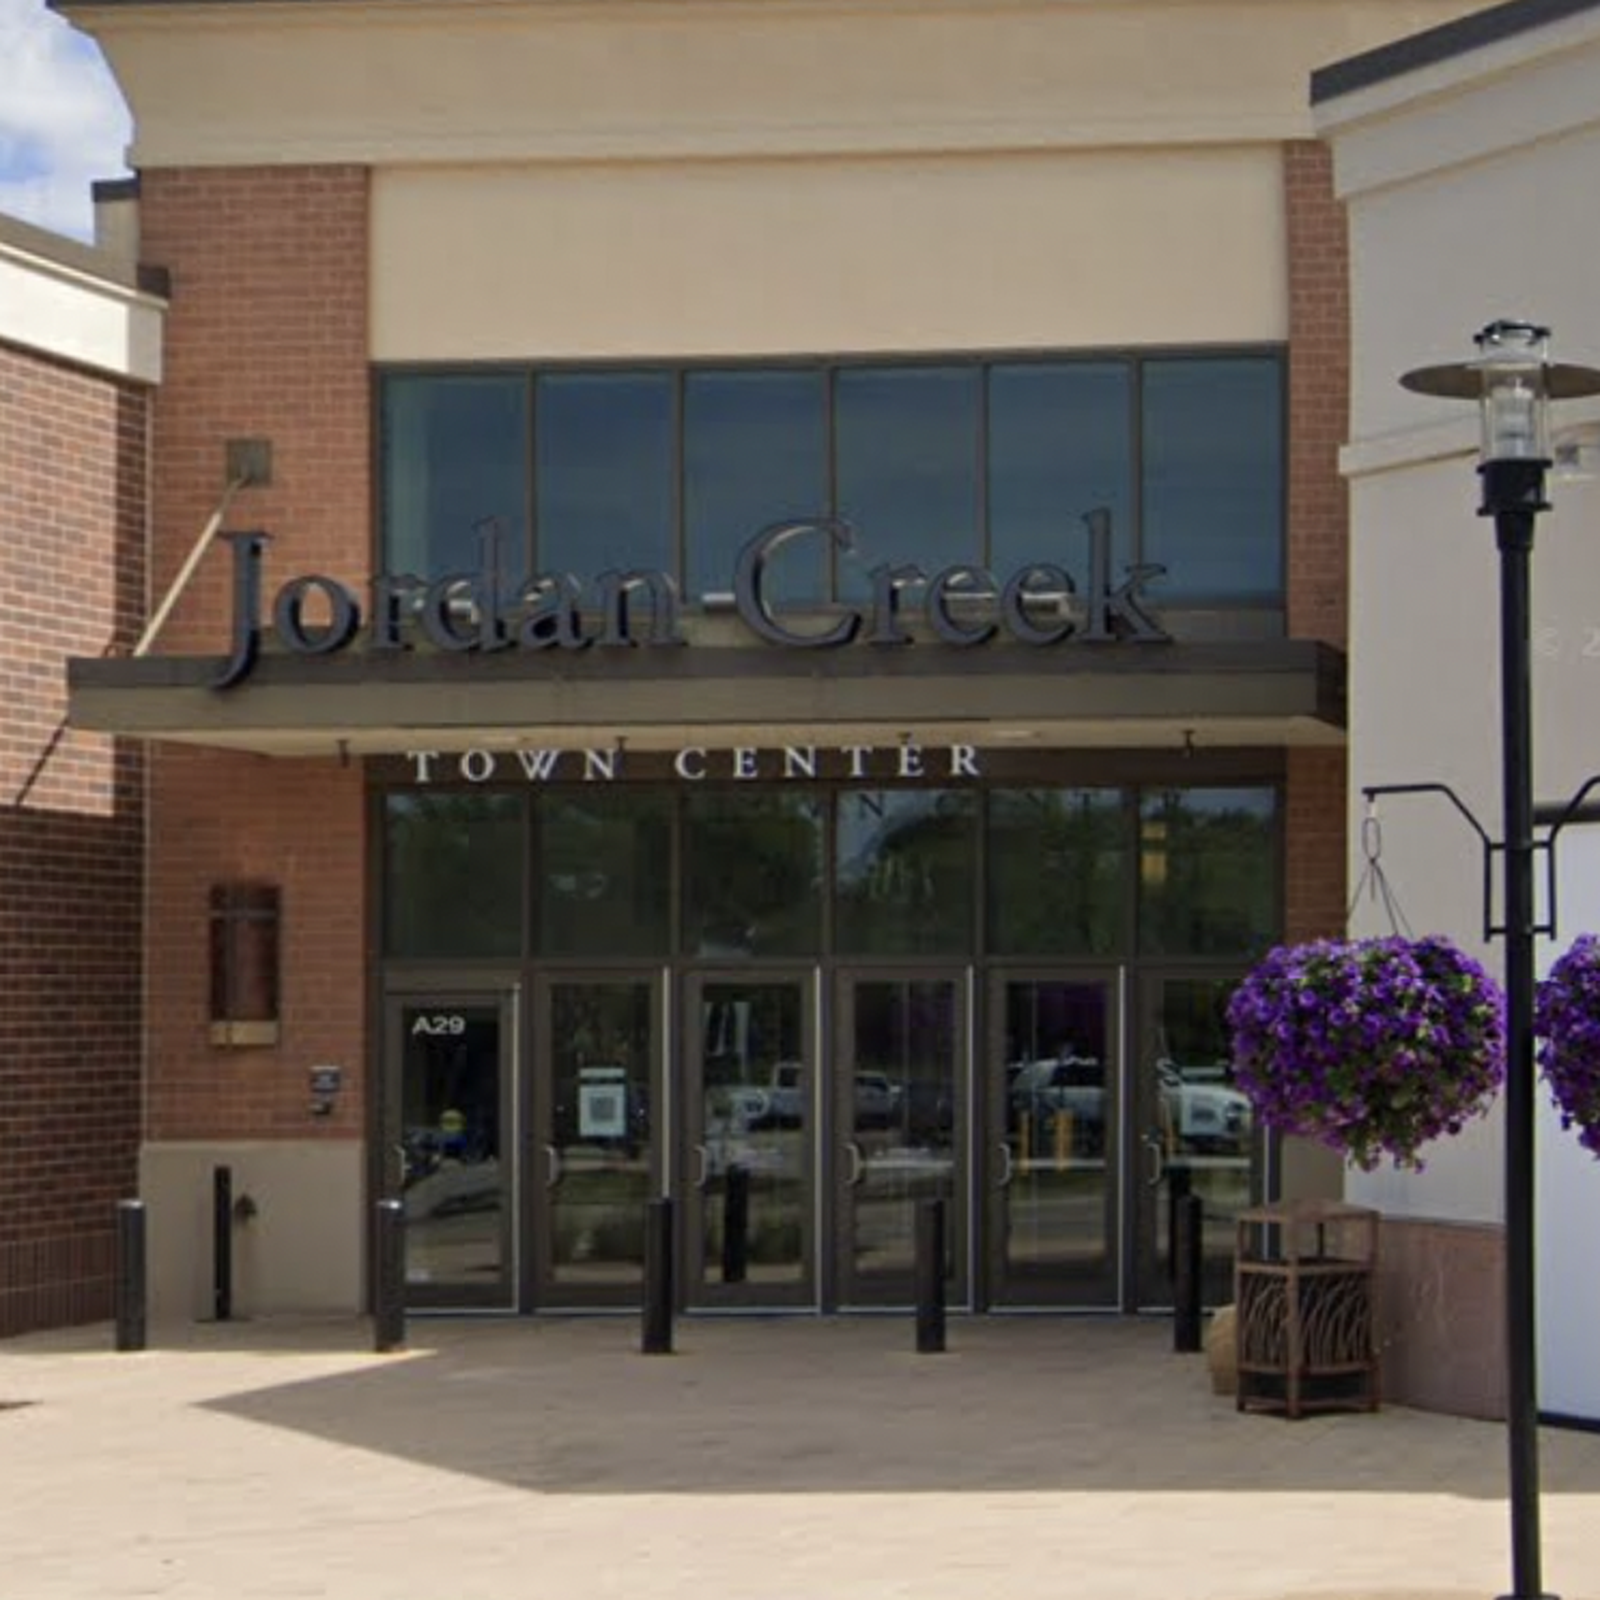 Find out what's next at Jordan Creek Town Center and which stores